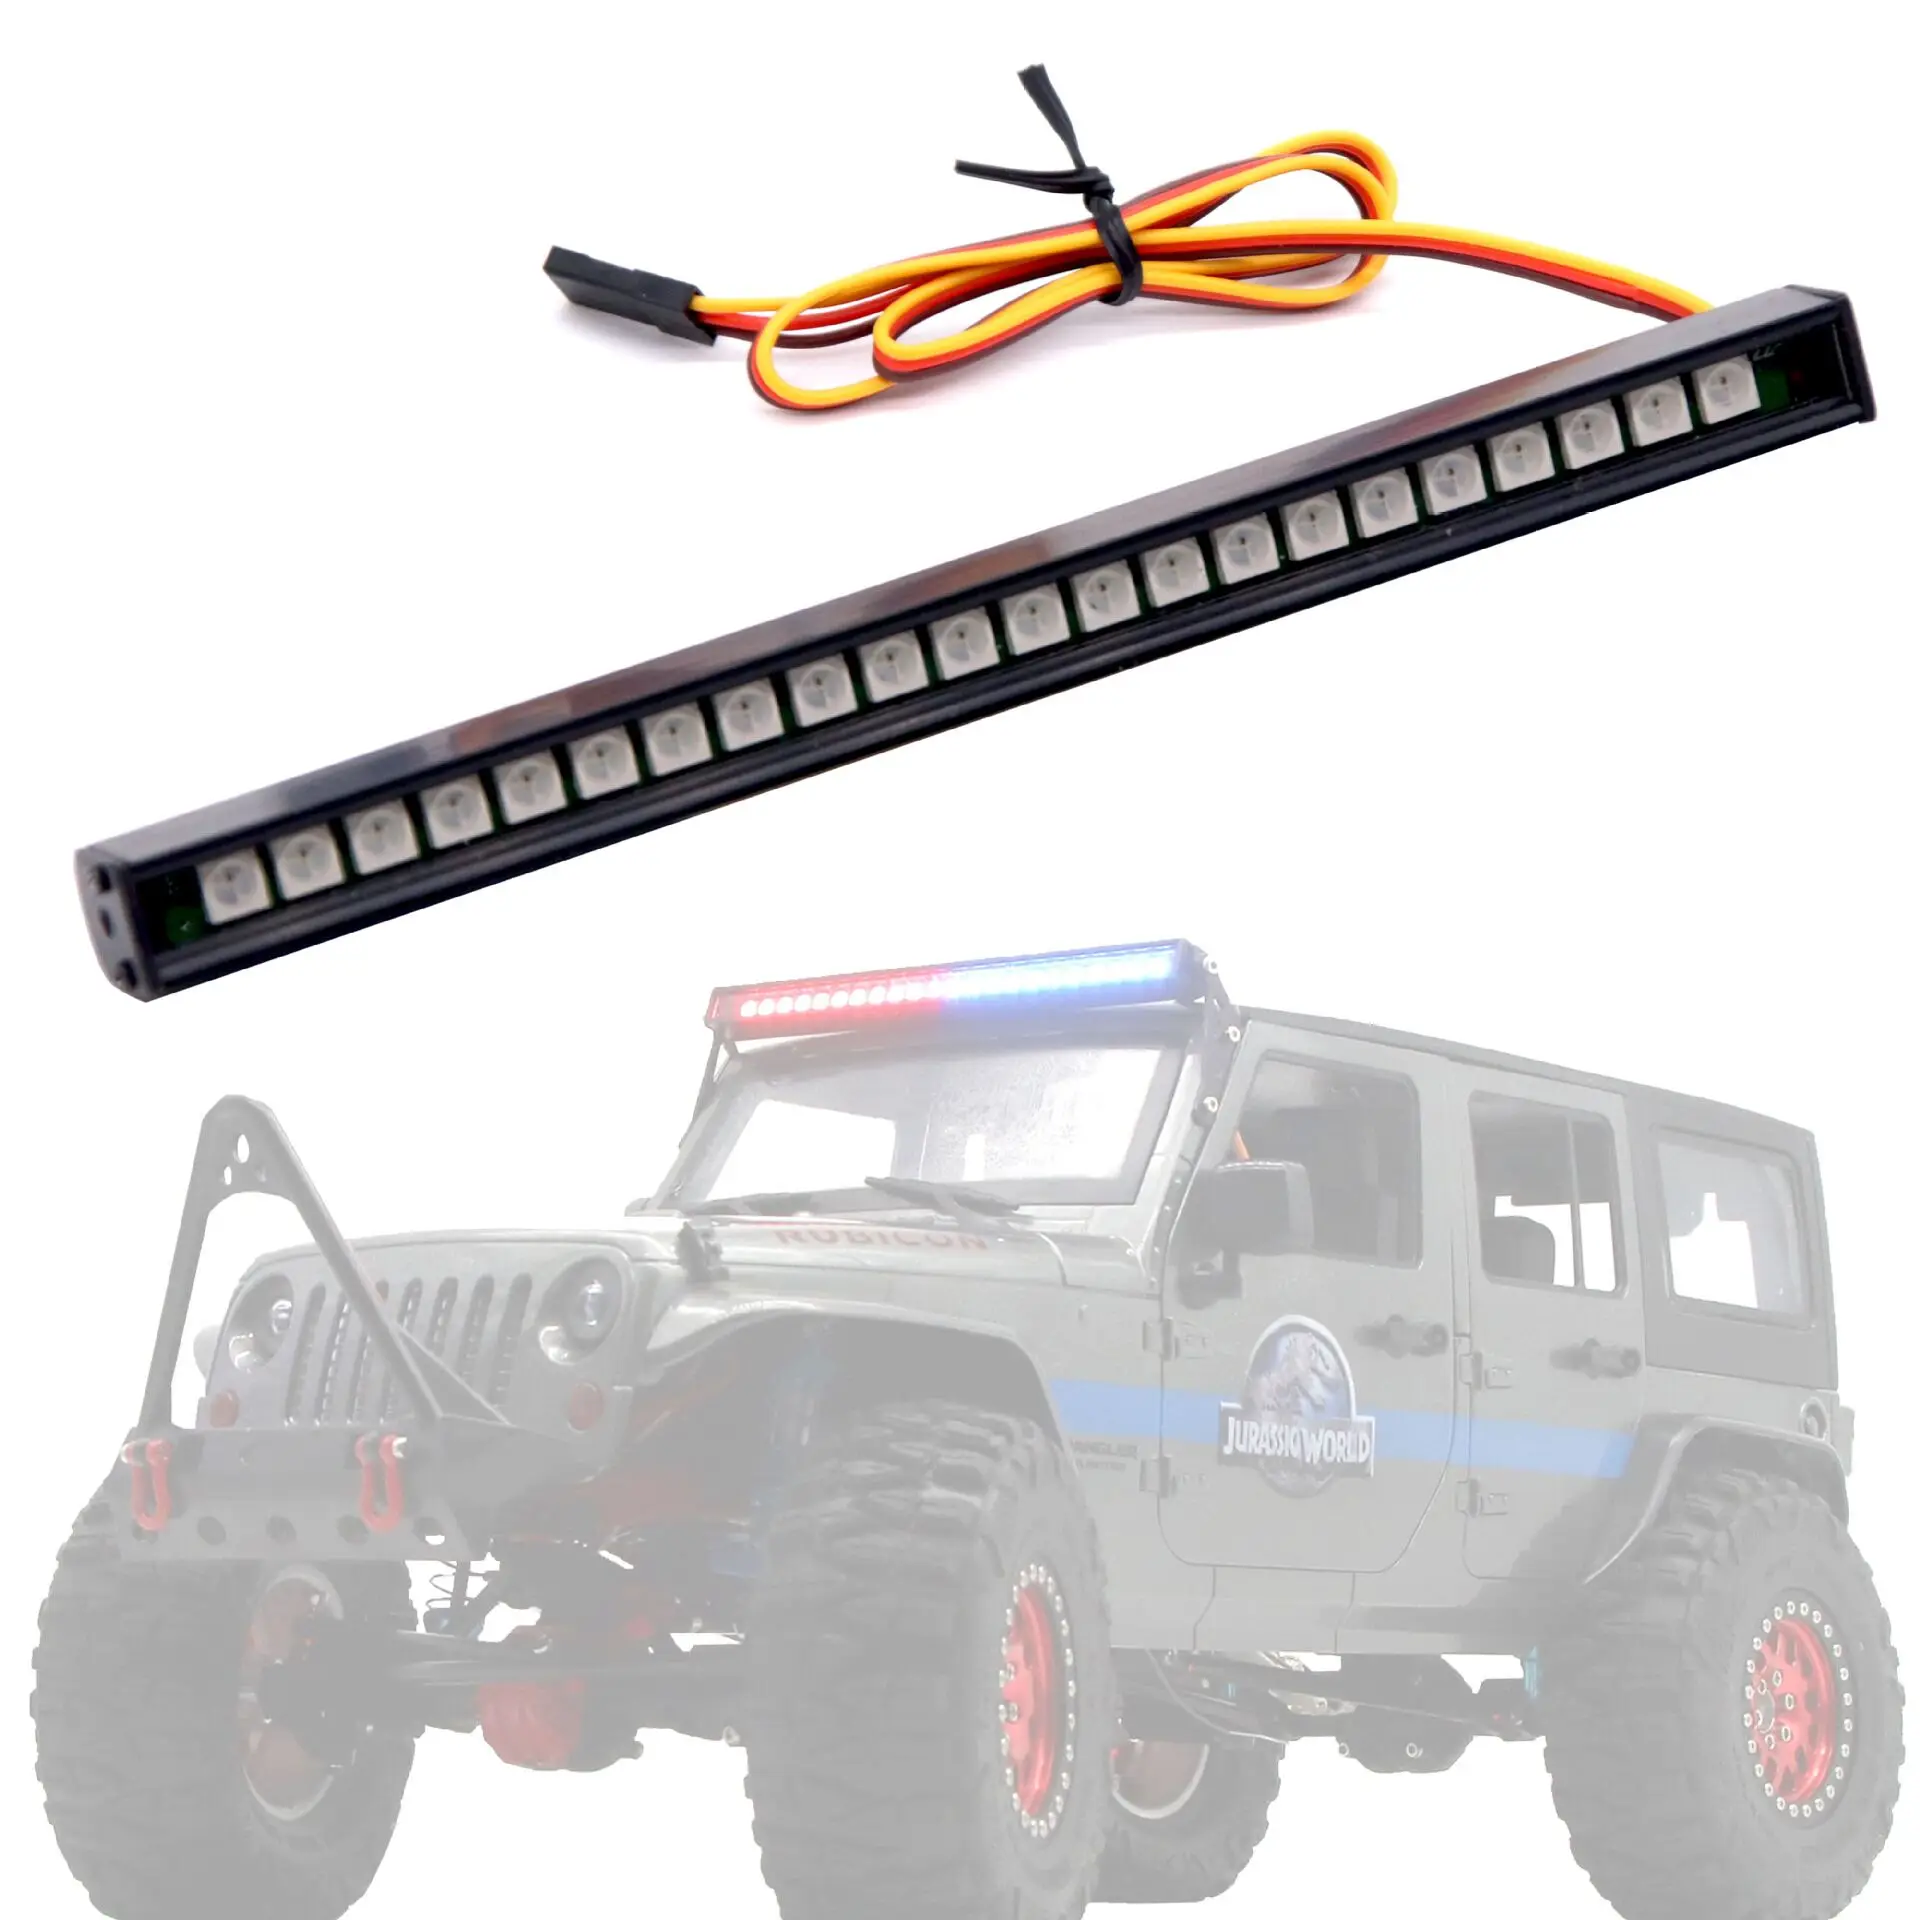 RC4WD LED Light Bar Kit for Axial SCX10 RC4WD 1:10 Scale RC Car Truck Model DIY 